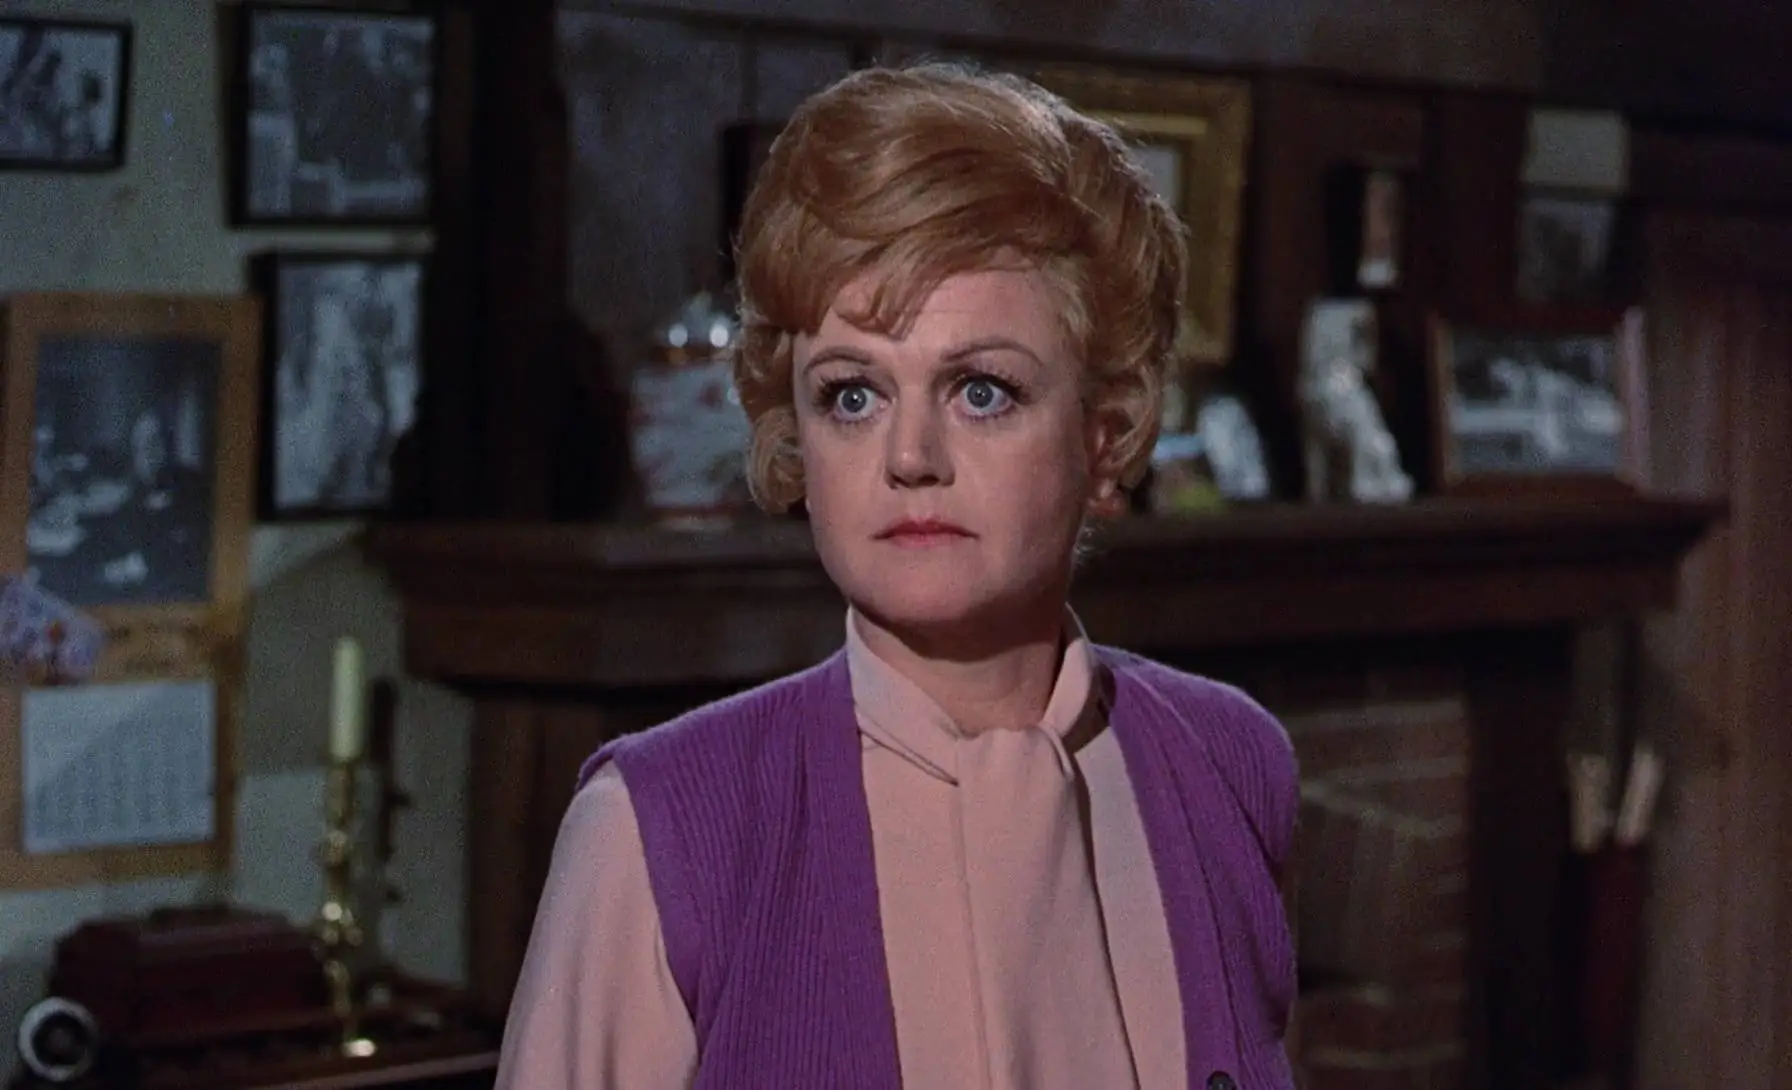 Bedknobs and Broomsticks (1971)